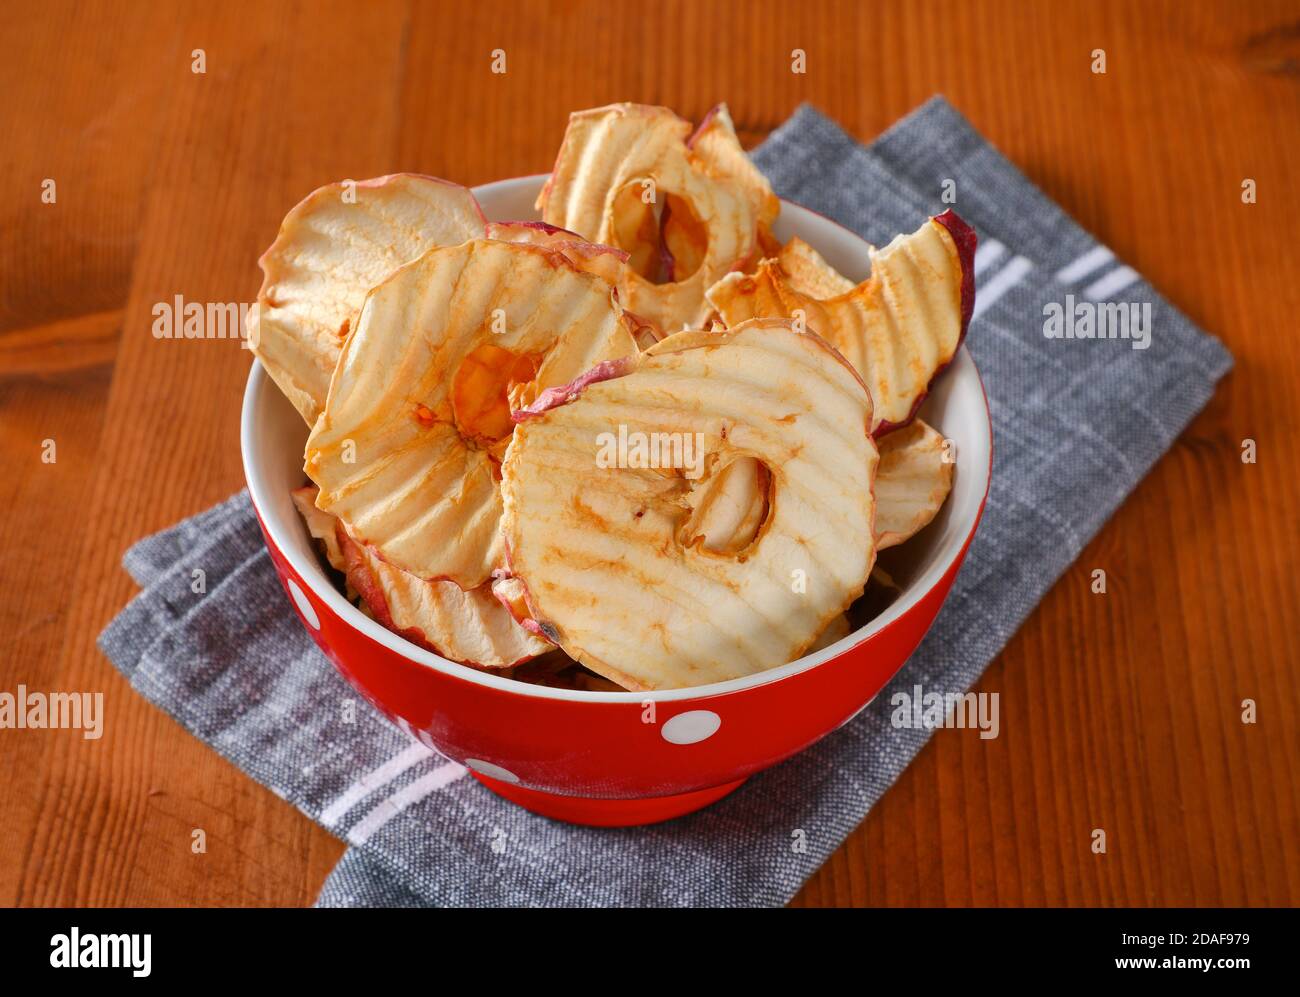 Bowl of dried apple slices - apple chips or rings - on gray napkin Stock Photo